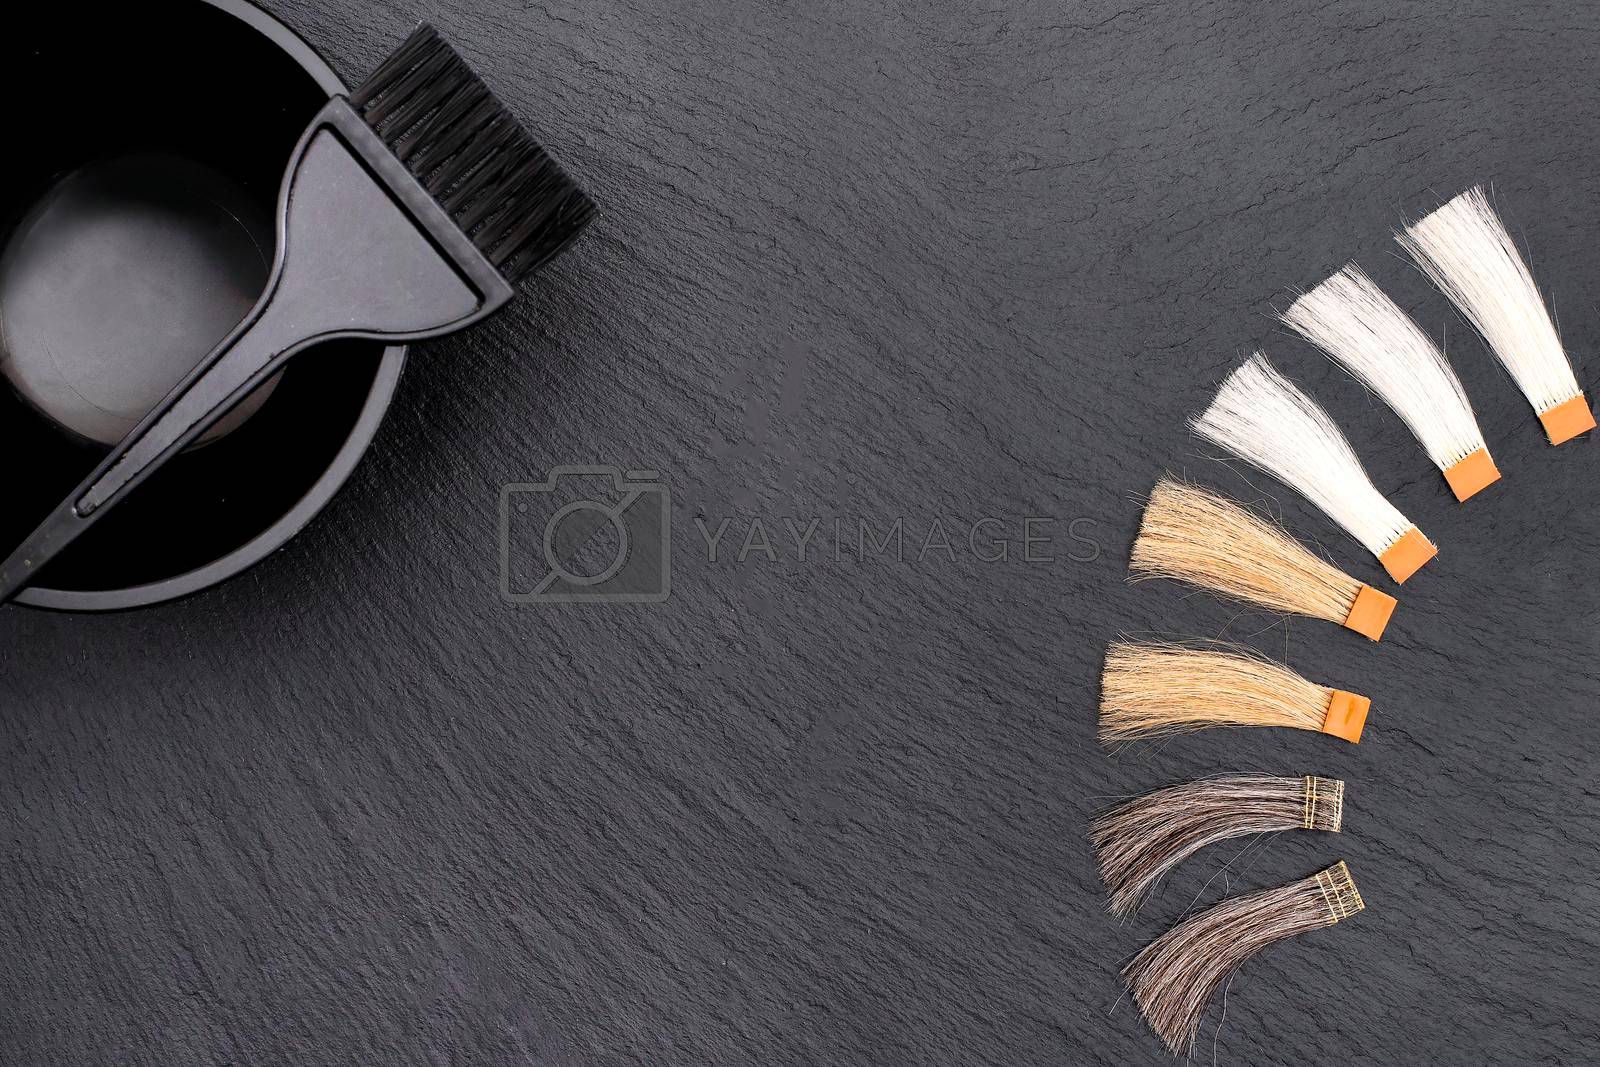 Royalty free image of Hairdresser Accessories for coloring hair by Jyliana